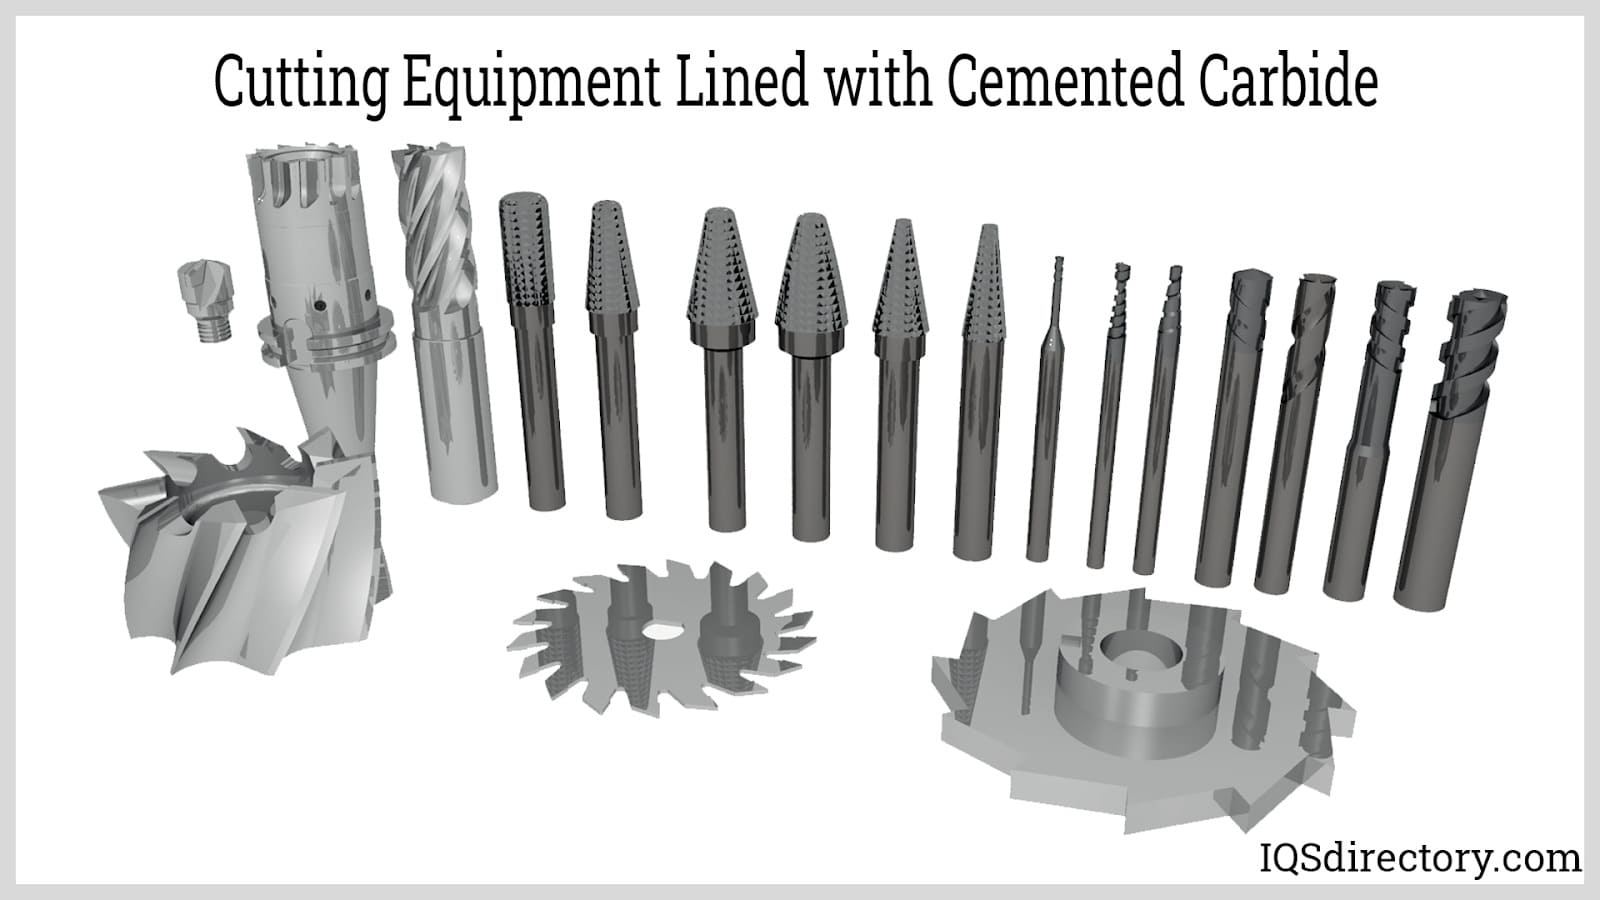 Cutting Equipment Lined with Cemented Carbide